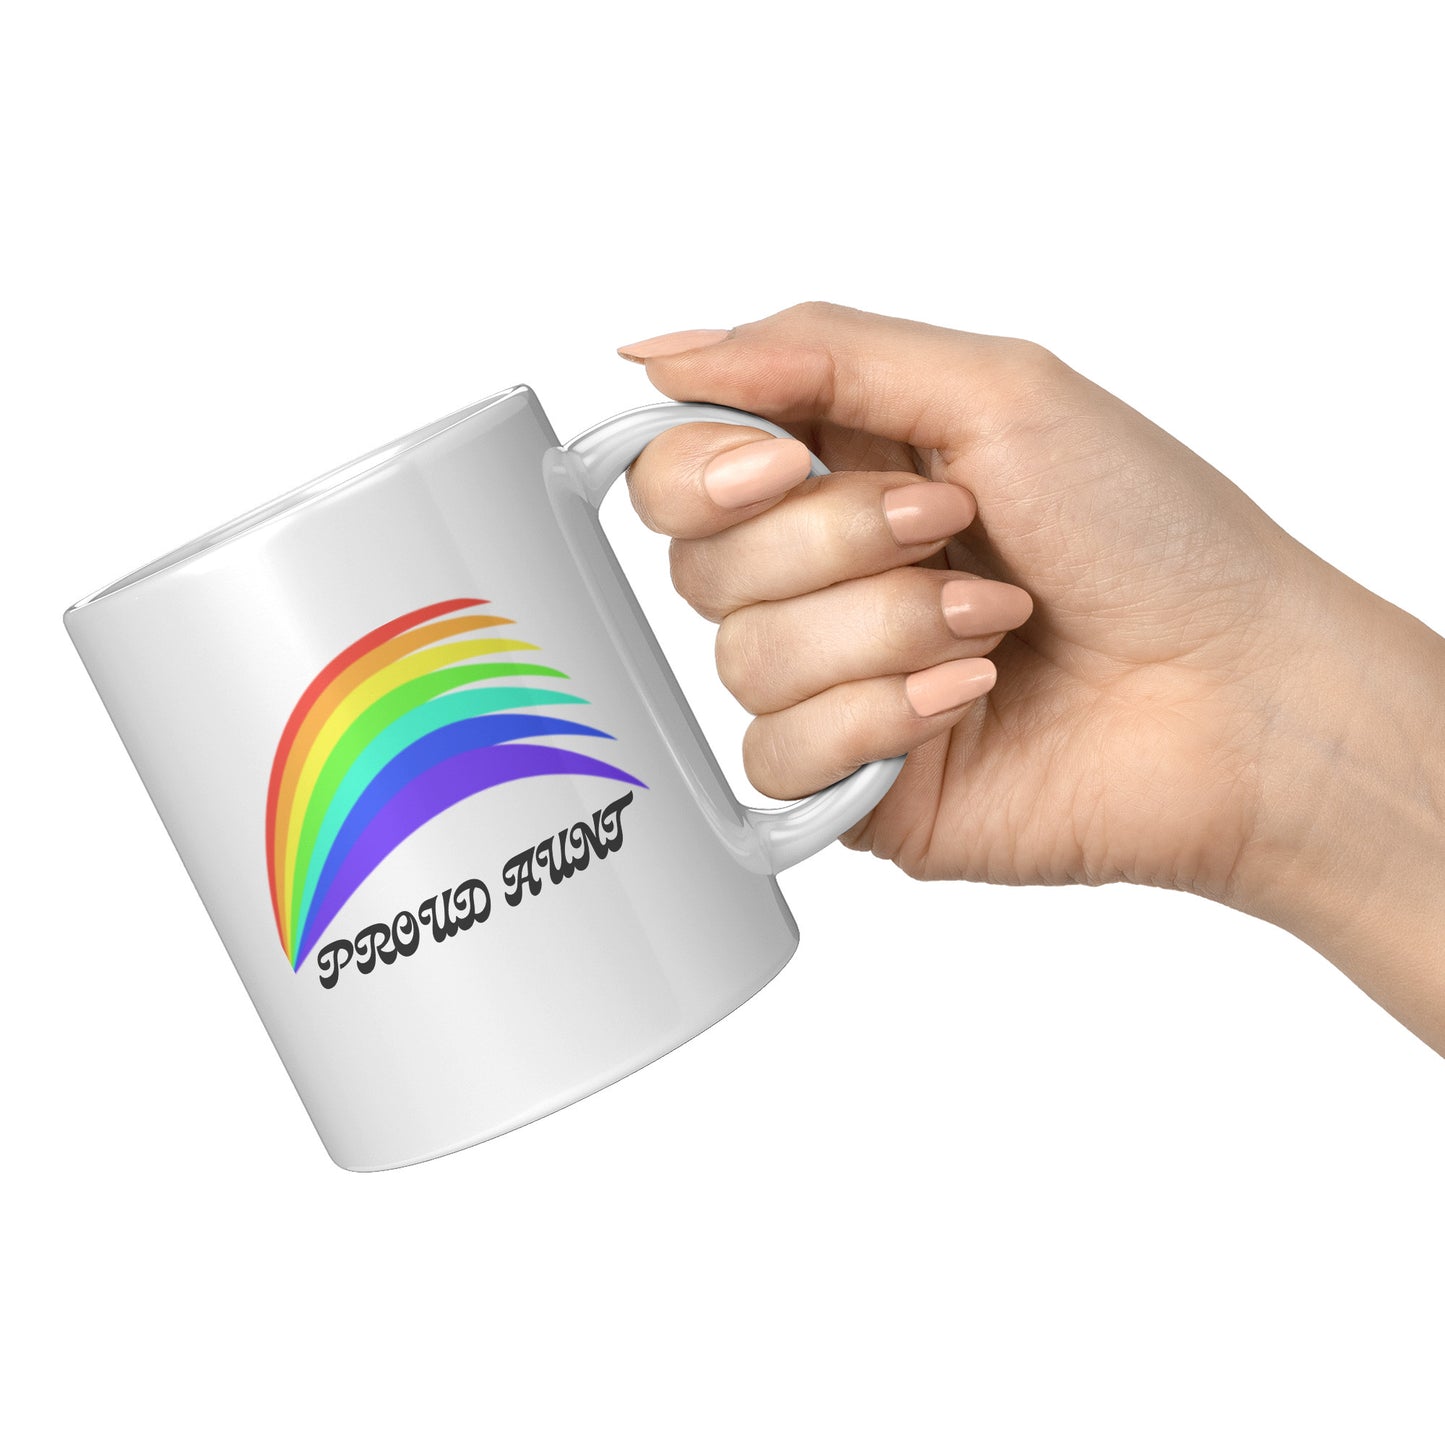 LGBTQ+ Pride Rainbow Mug For Aunt To Support Your Loved Ones, White With Colourful Design